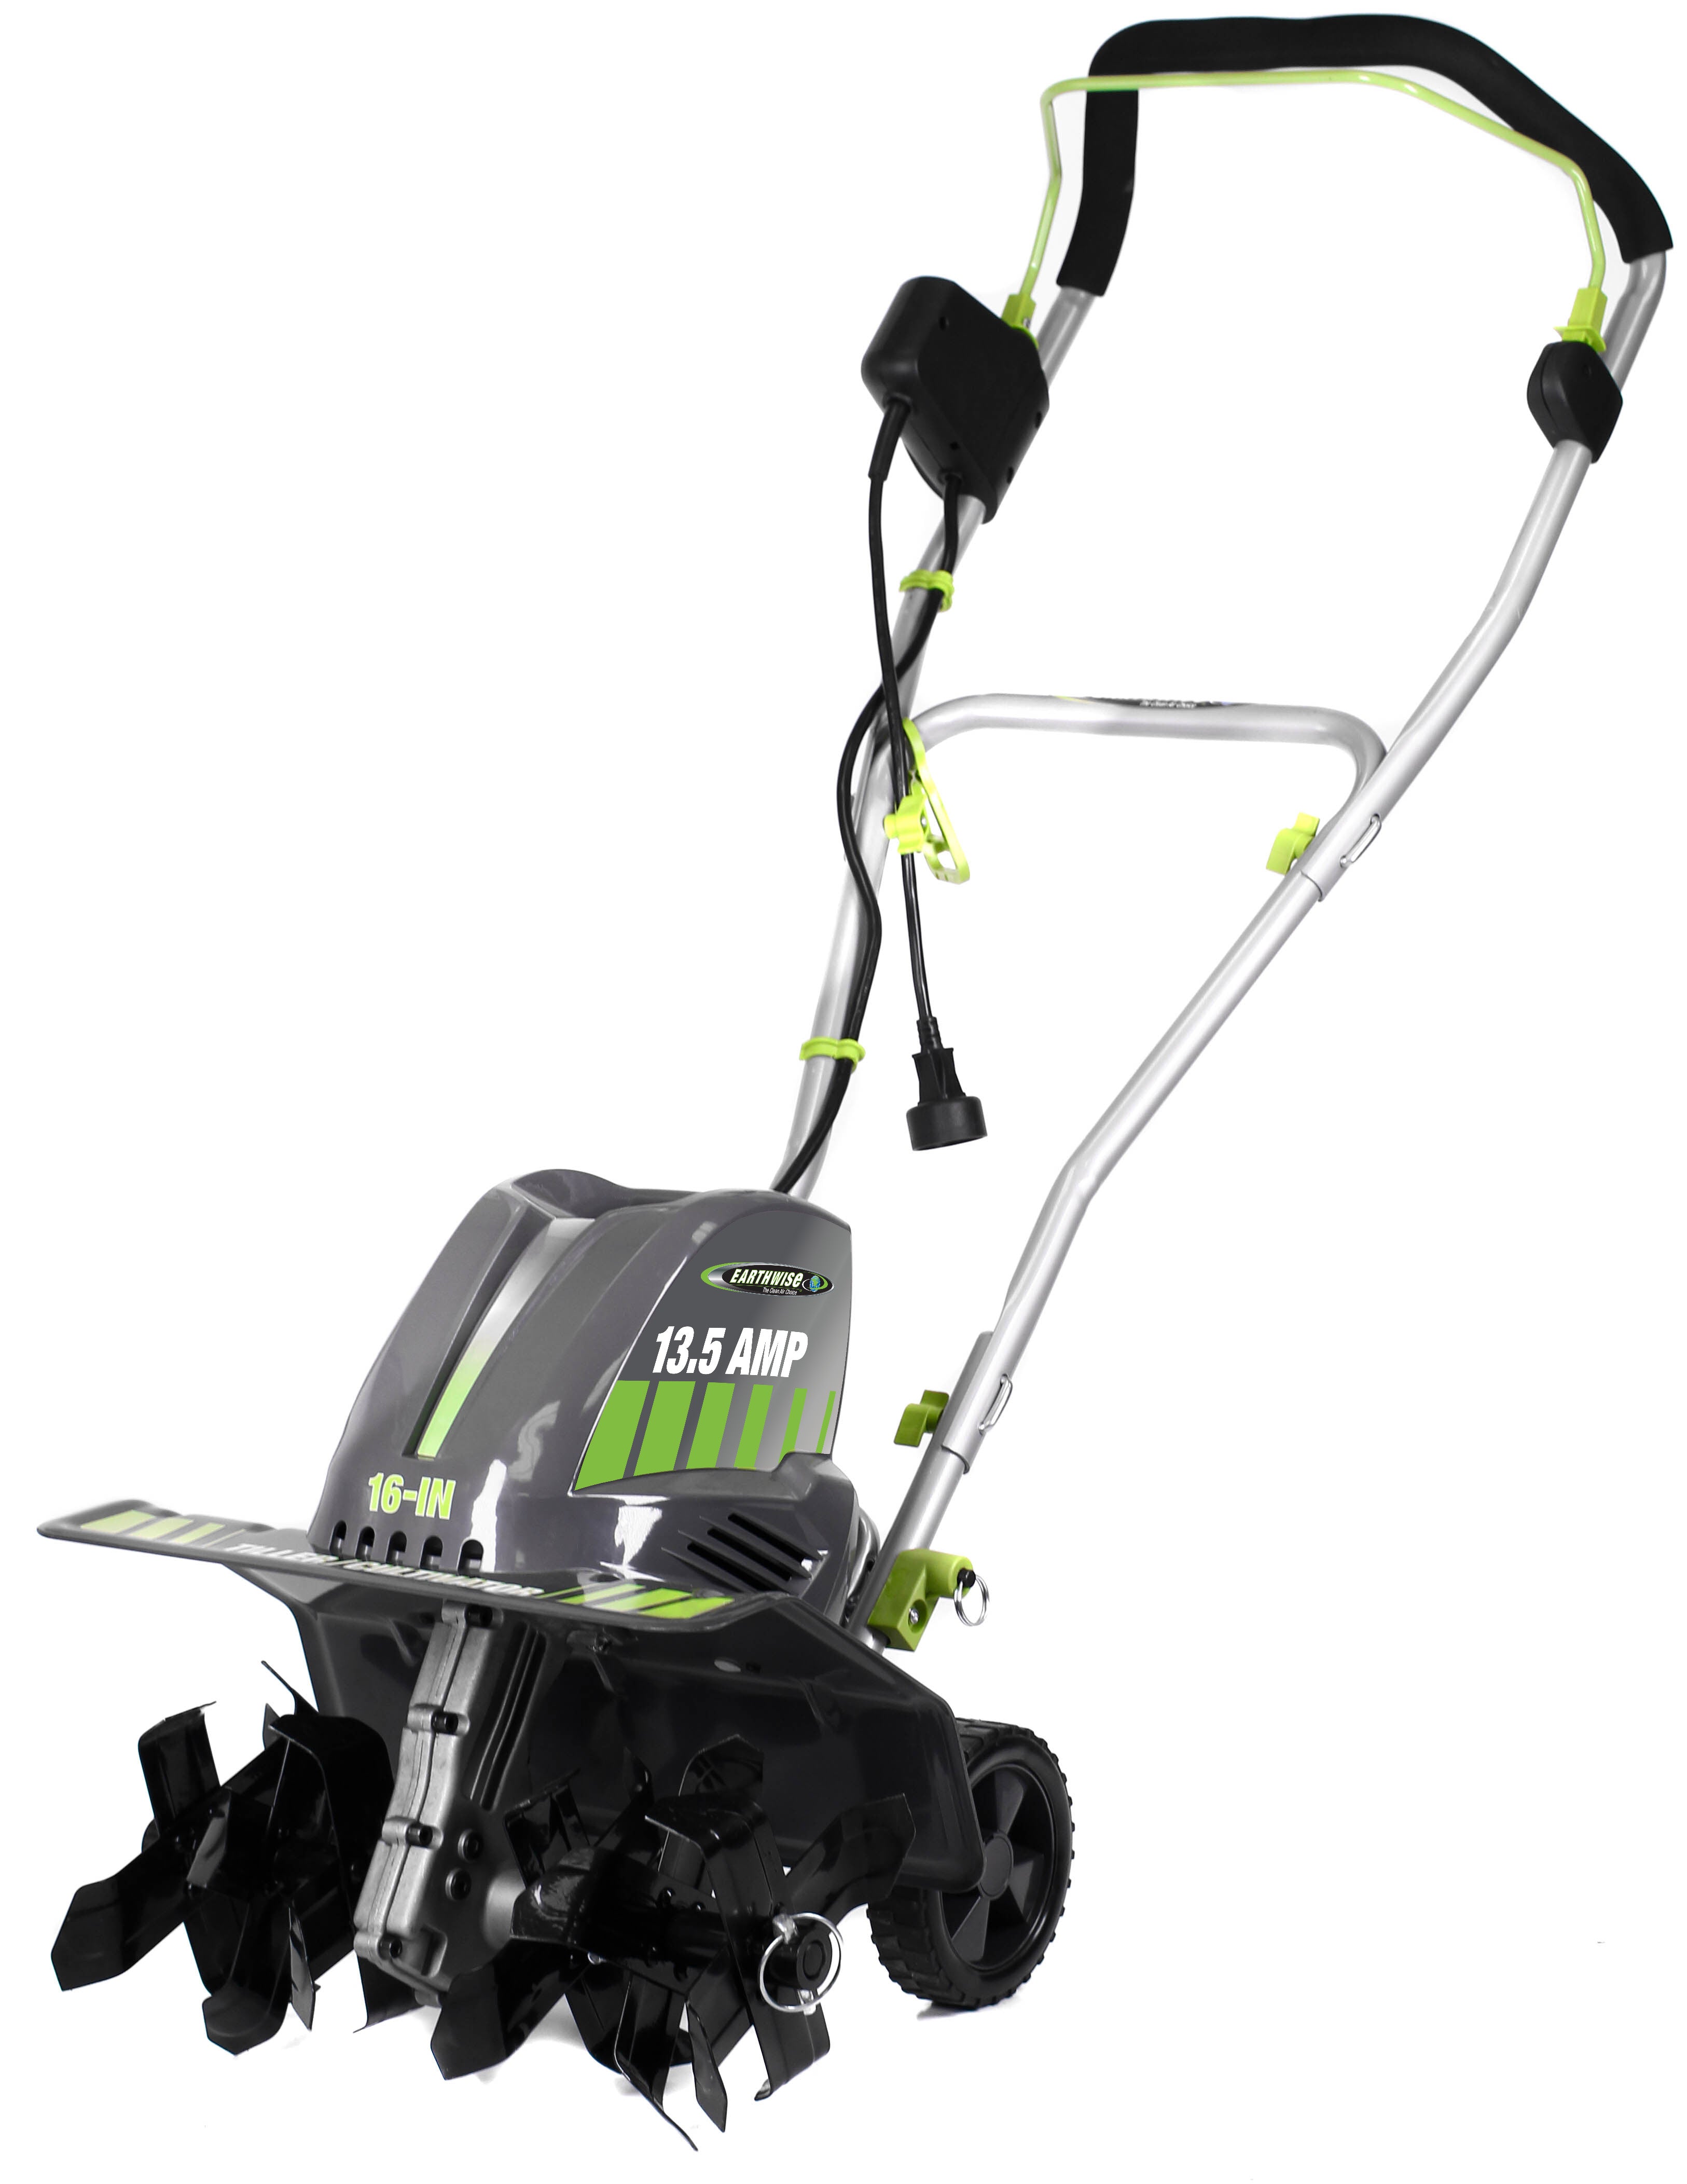 Earthwise Power Tools by ALM 16" 13.5-Amp 120V Corded Tiller/Cultivator